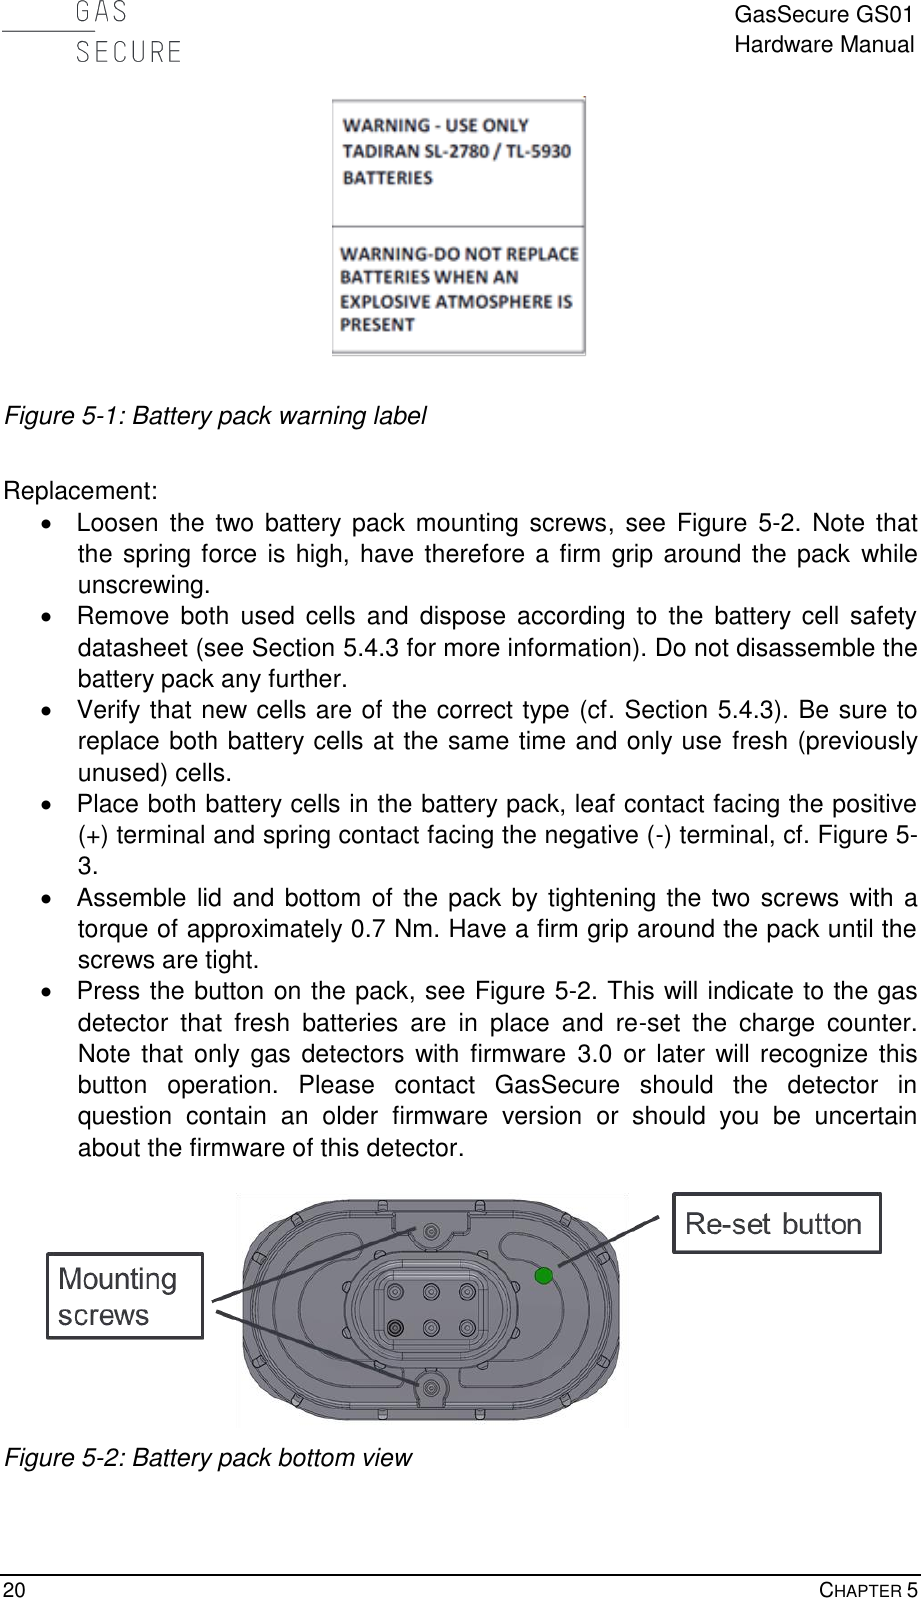  GasSecure GS01 Hardware Manual  20    CHAPTER 5   Figure 5-1: Battery pack warning label  Replacement:   Loosen  the two  battery pack mounting screws,  see  Figure  5-2.  Note  that the spring force is high, have therefore a firm grip around the pack while unscrewing.   Remove  both  used cells  and  dispose according  to  the  battery  cell  safety datasheet (see Section 5.4.3 for more information). Do not disassemble the battery pack any further.   Verify that new cells are of the correct type (cf. Section 5.4.3). Be sure to replace both battery cells at the same time and only use fresh (previously unused) cells.   Place both battery cells in the battery pack, leaf contact facing the positive (+) terminal and spring contact facing the negative (-) terminal, cf. Figure 5-3.   Assemble  lid  and bottom of the pack by tightening the two screws with a torque of approximately 0.7 Nm. Have a firm grip around the pack until the screws are tight.   Press the button on the pack, see Figure 5-2. This will indicate to the gas detector  that  fresh  batteries  are  in  place  and  re-set  the  charge  counter. Note  that only gas  detectors with firmware  3.0  or  later will recognize this button  operation.  Please  contact  GasSecure  should  the  detector  in question  contain  an  older  firmware  version  or  should  you  be  uncertain about the firmware of this detector.   Figure 5-2: Battery pack bottom view  